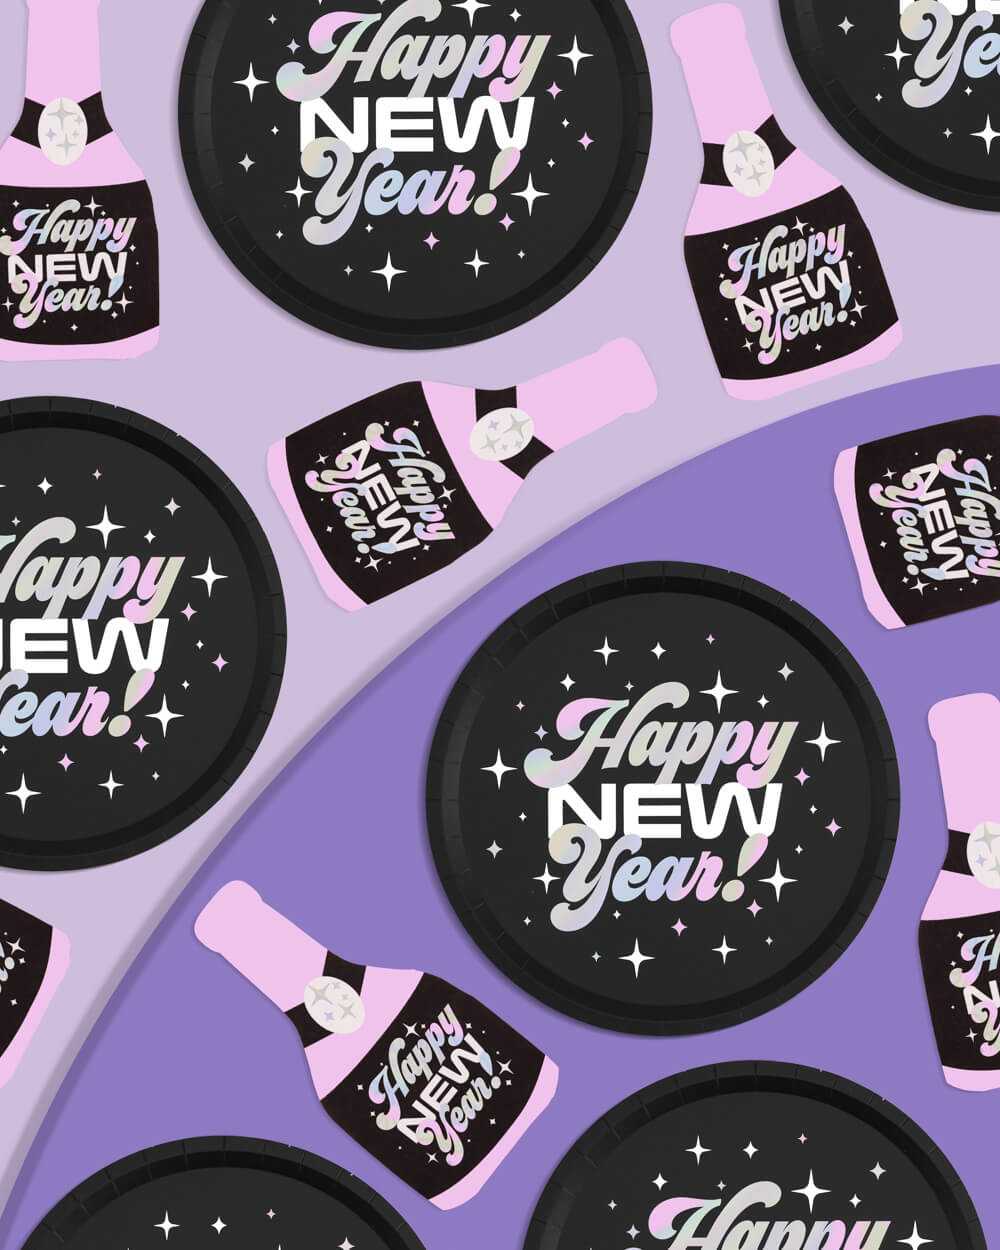 PLATES - RETRO HAPPY NEW YEAR (Pack of 25)